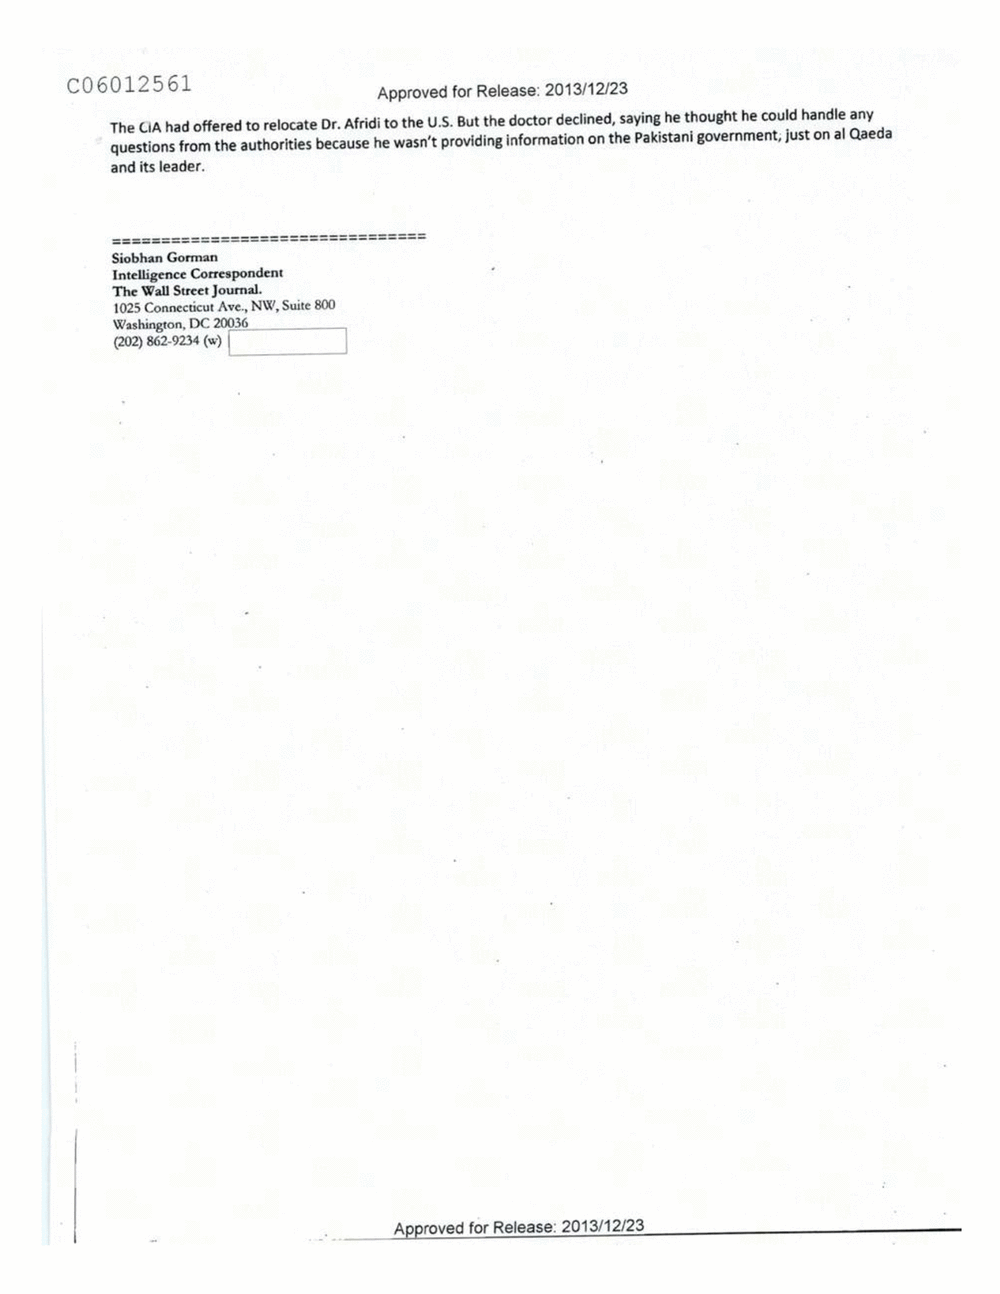 Page 96 from Email Correspondence Between Reporters and CIA Flacks